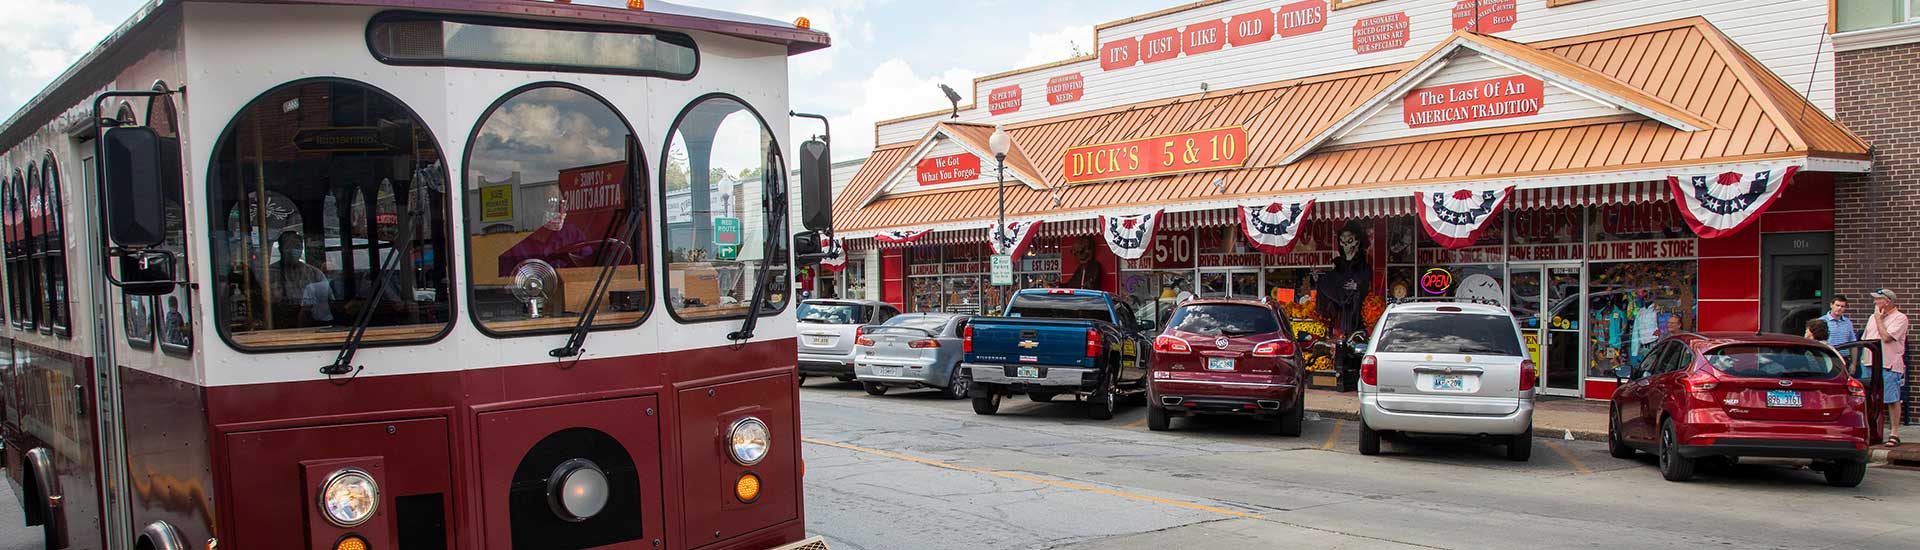 Sparky, the free Downtown Branson Trolley parked across from Dick's 5&10 on Main Street, Branson, MO.